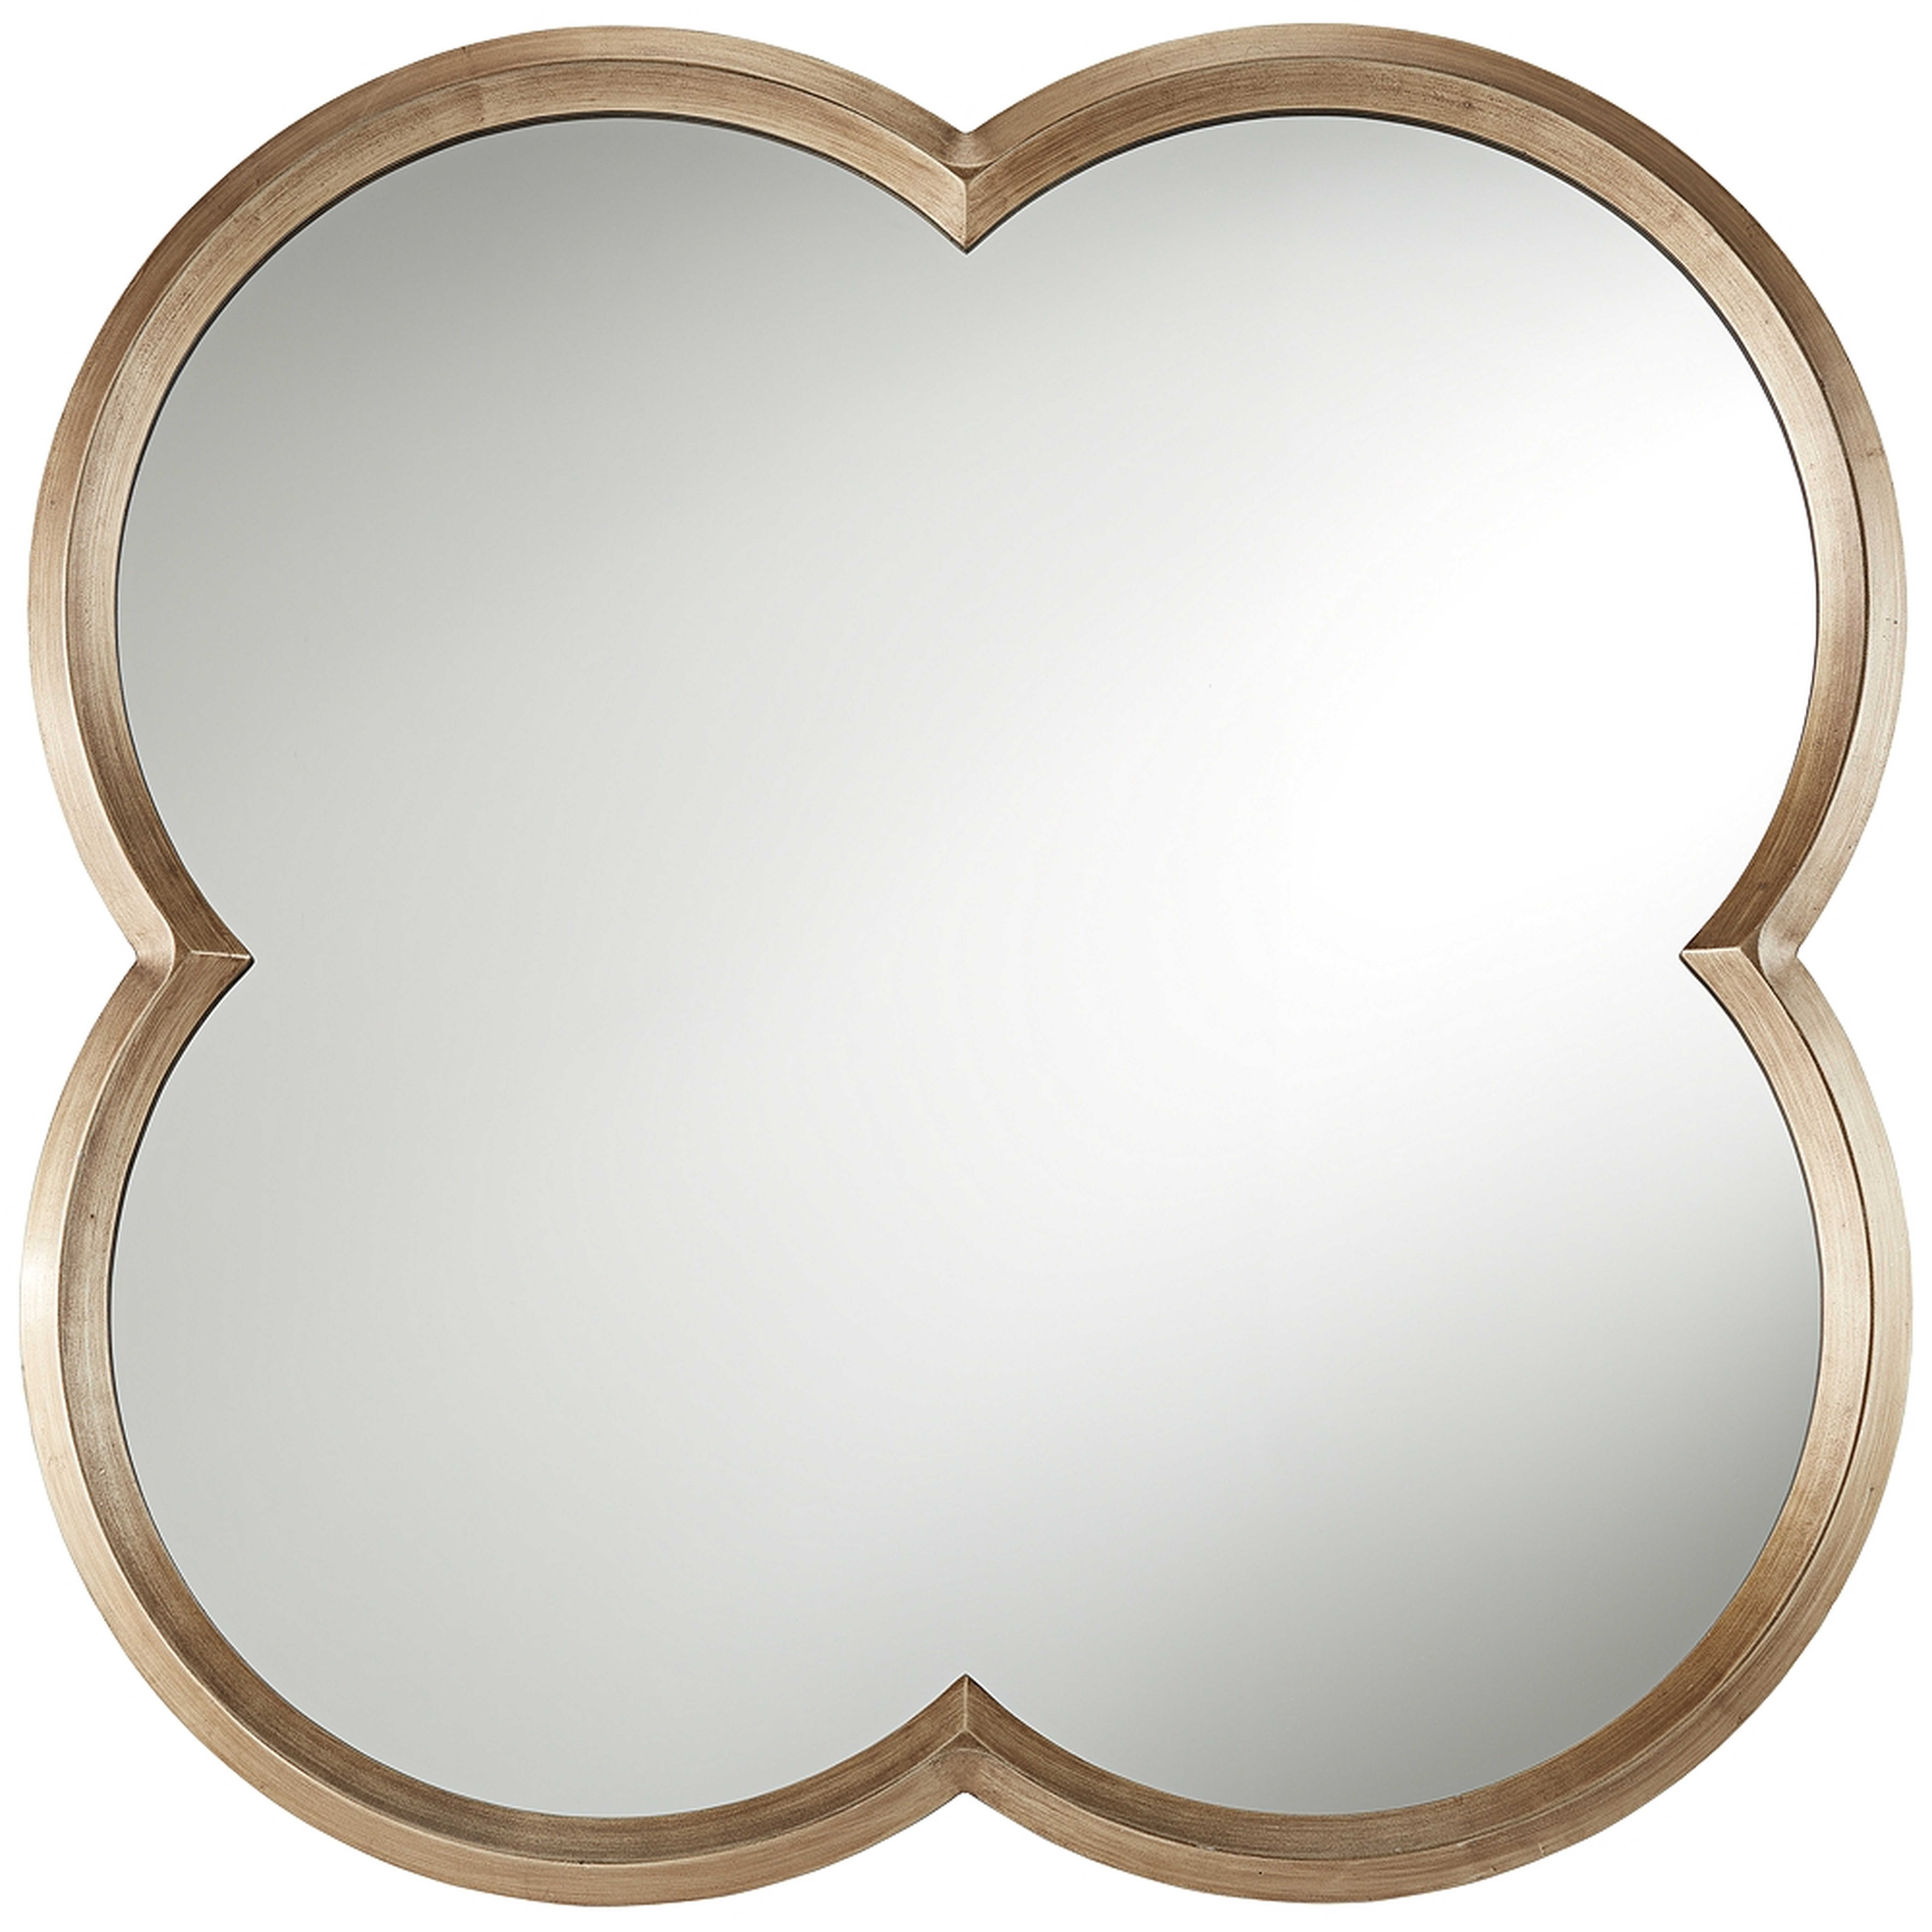 Palazzo Gold  Clover Framed Wall Mirror - Style # 87X02 - Lamps Plus